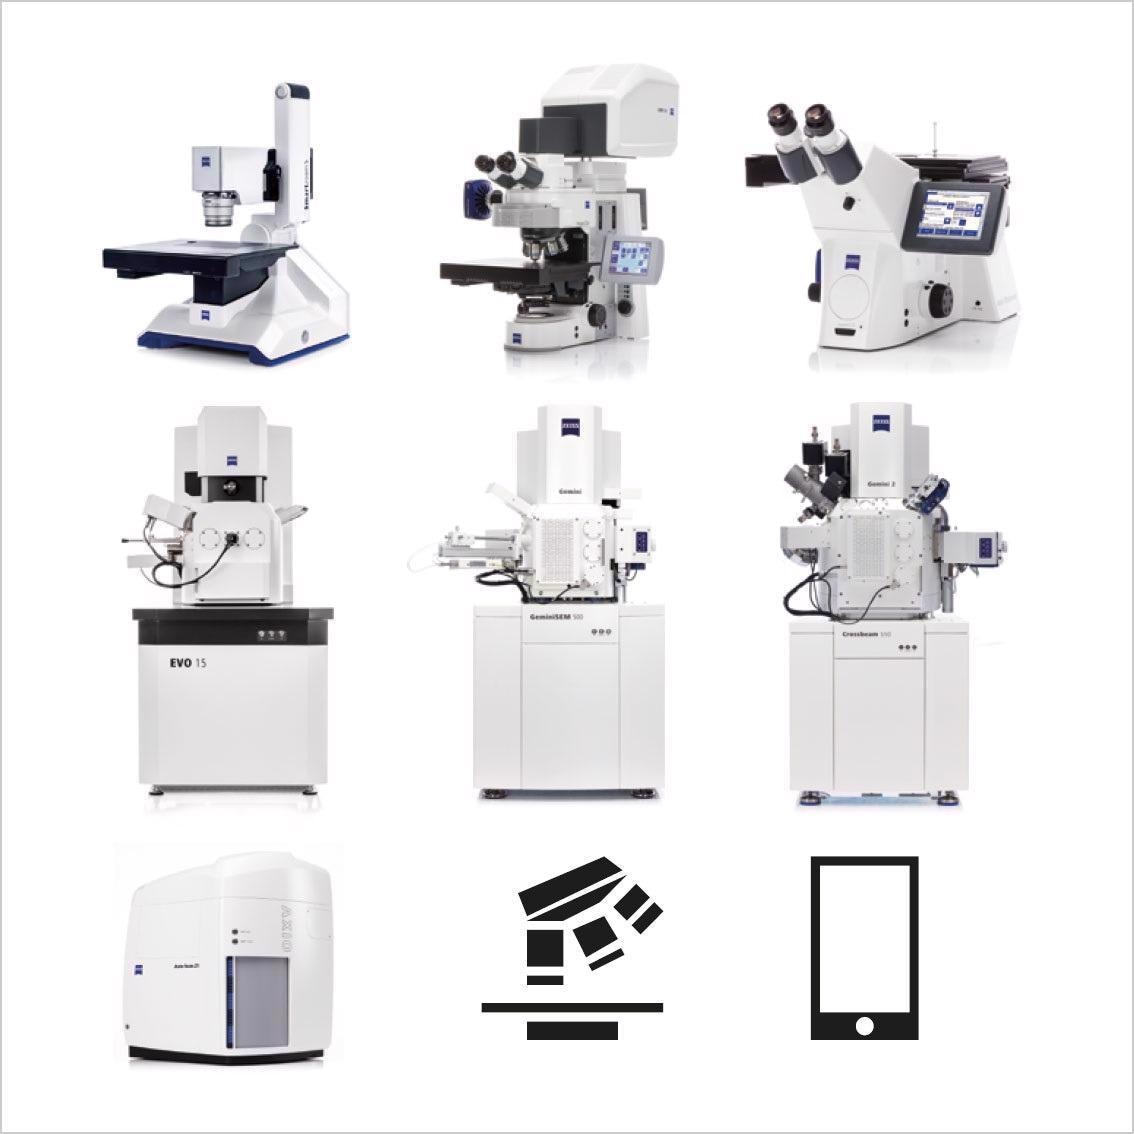 ZEISS ZEN Connect for Materials Research Labs